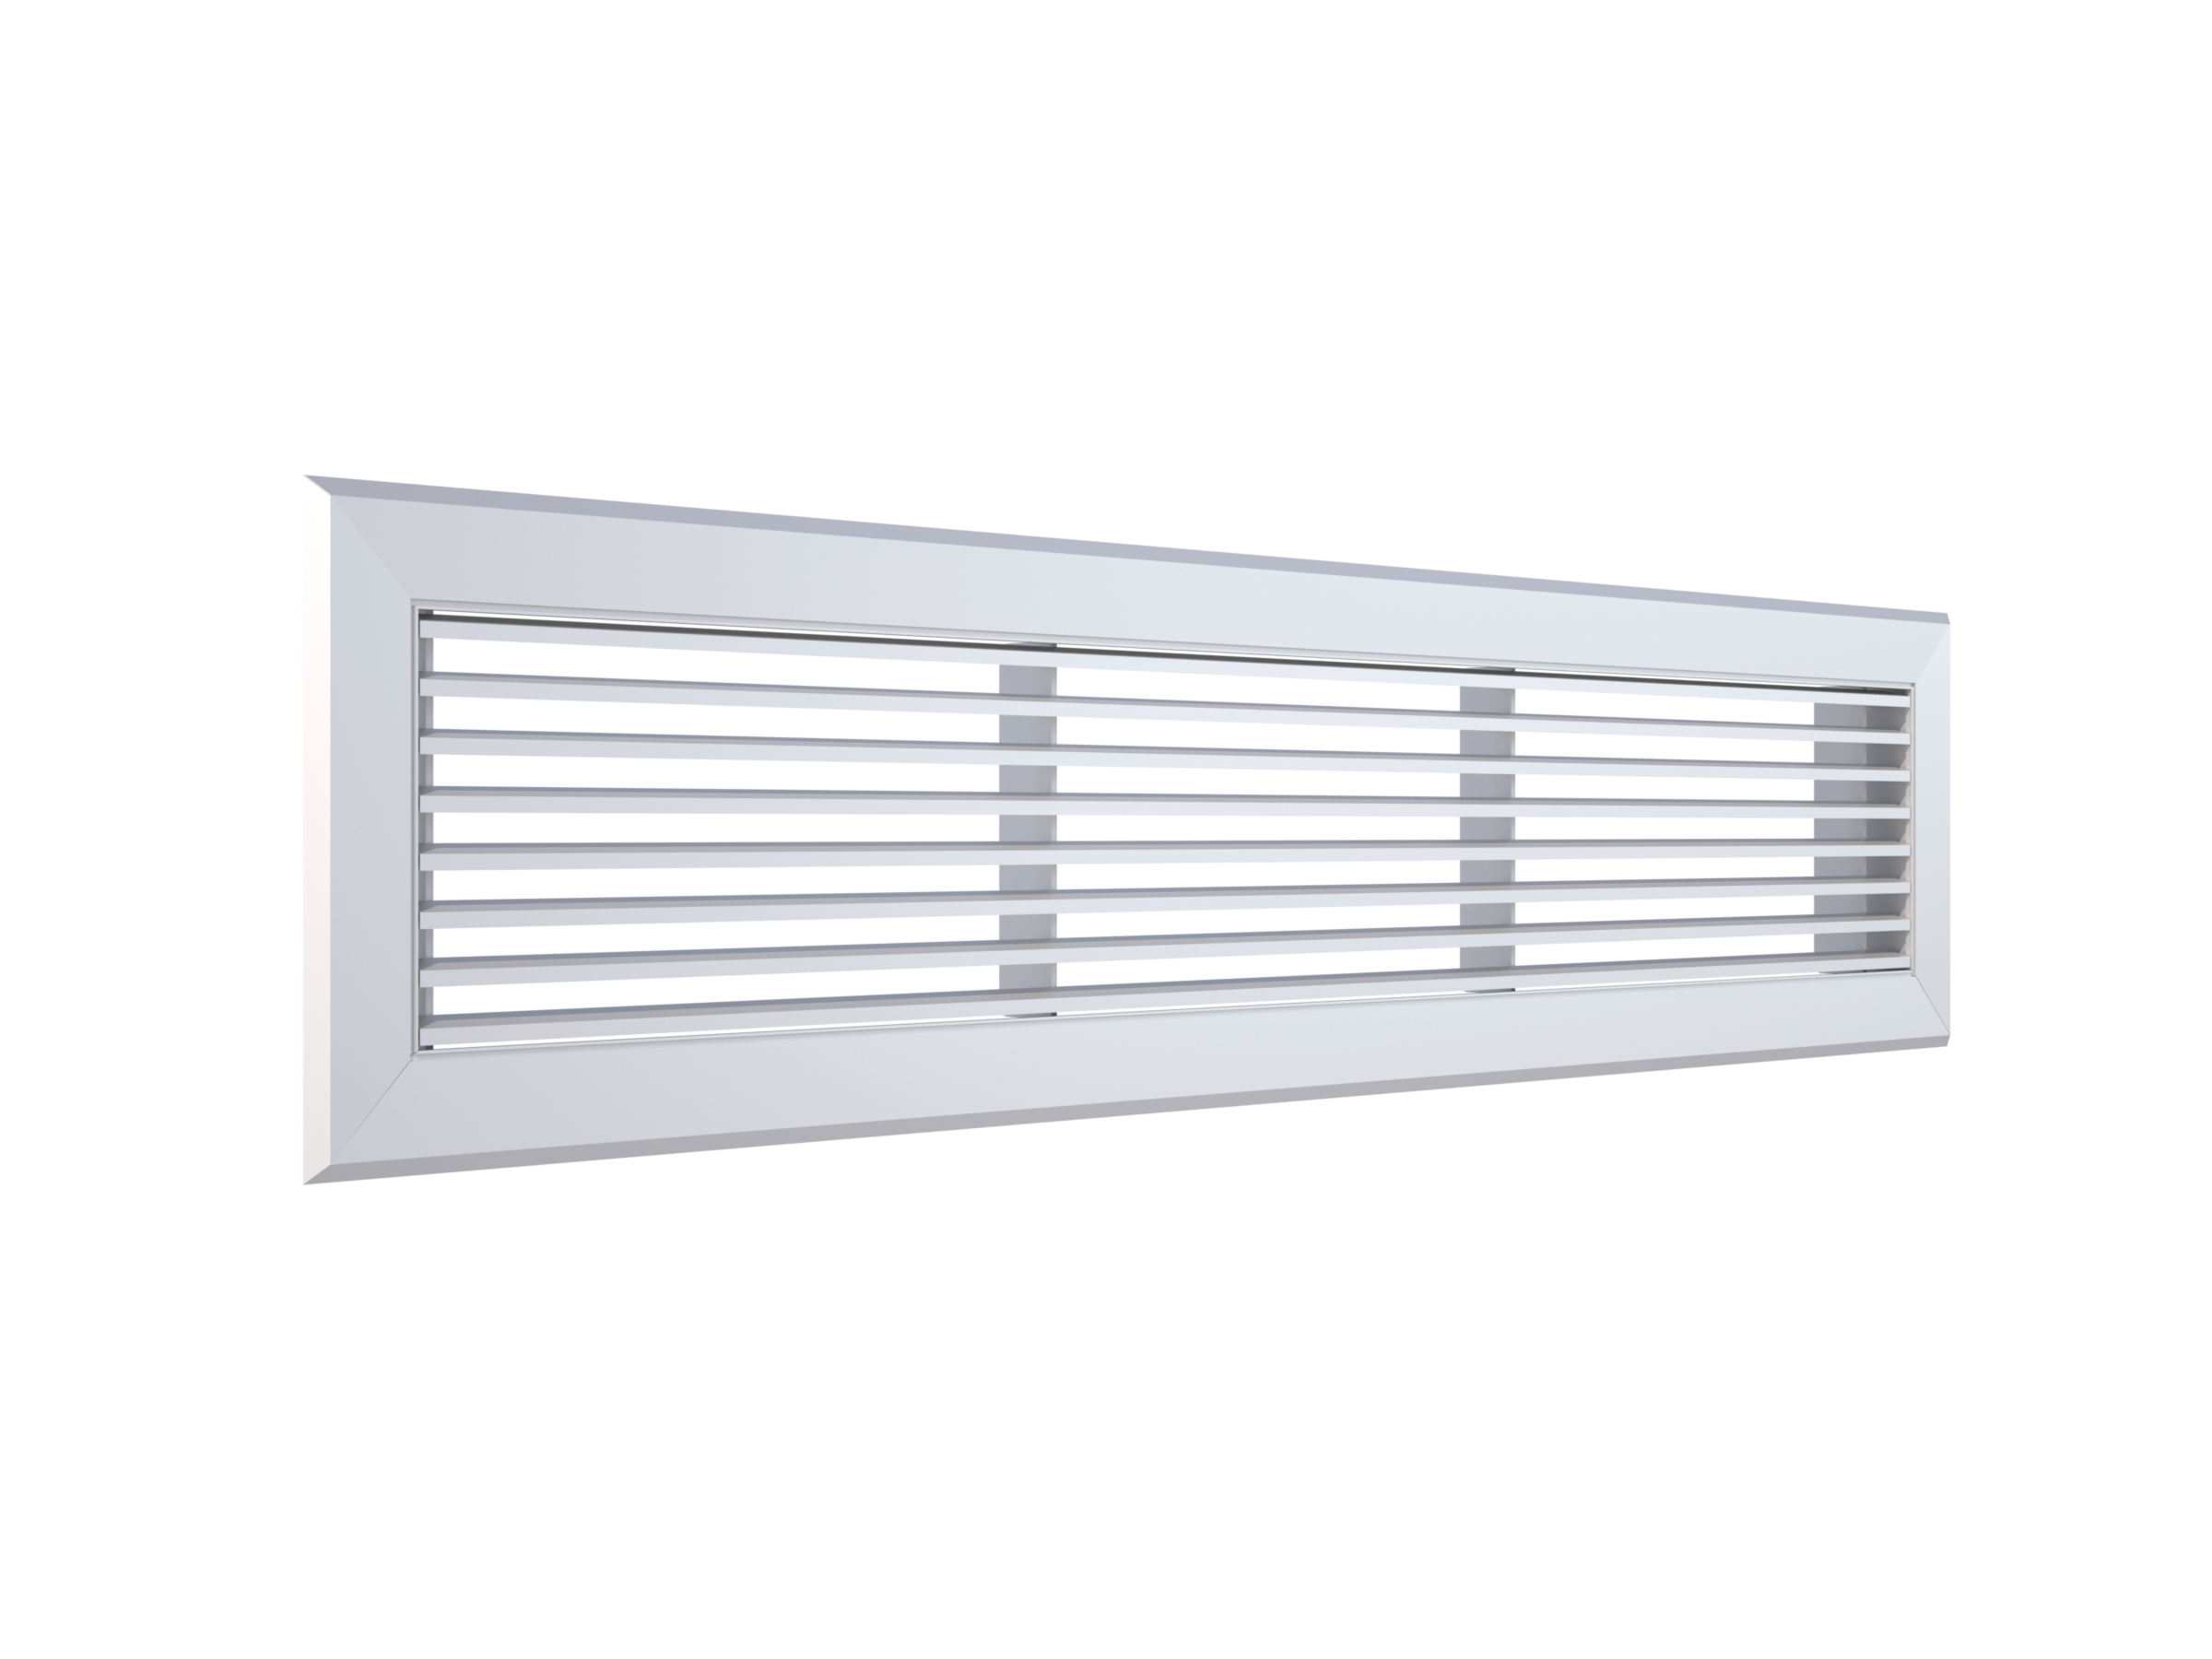 Holyoake LDH-1215 Linear Bar Grille with 15-degree air discharge and 12mm blade spacing